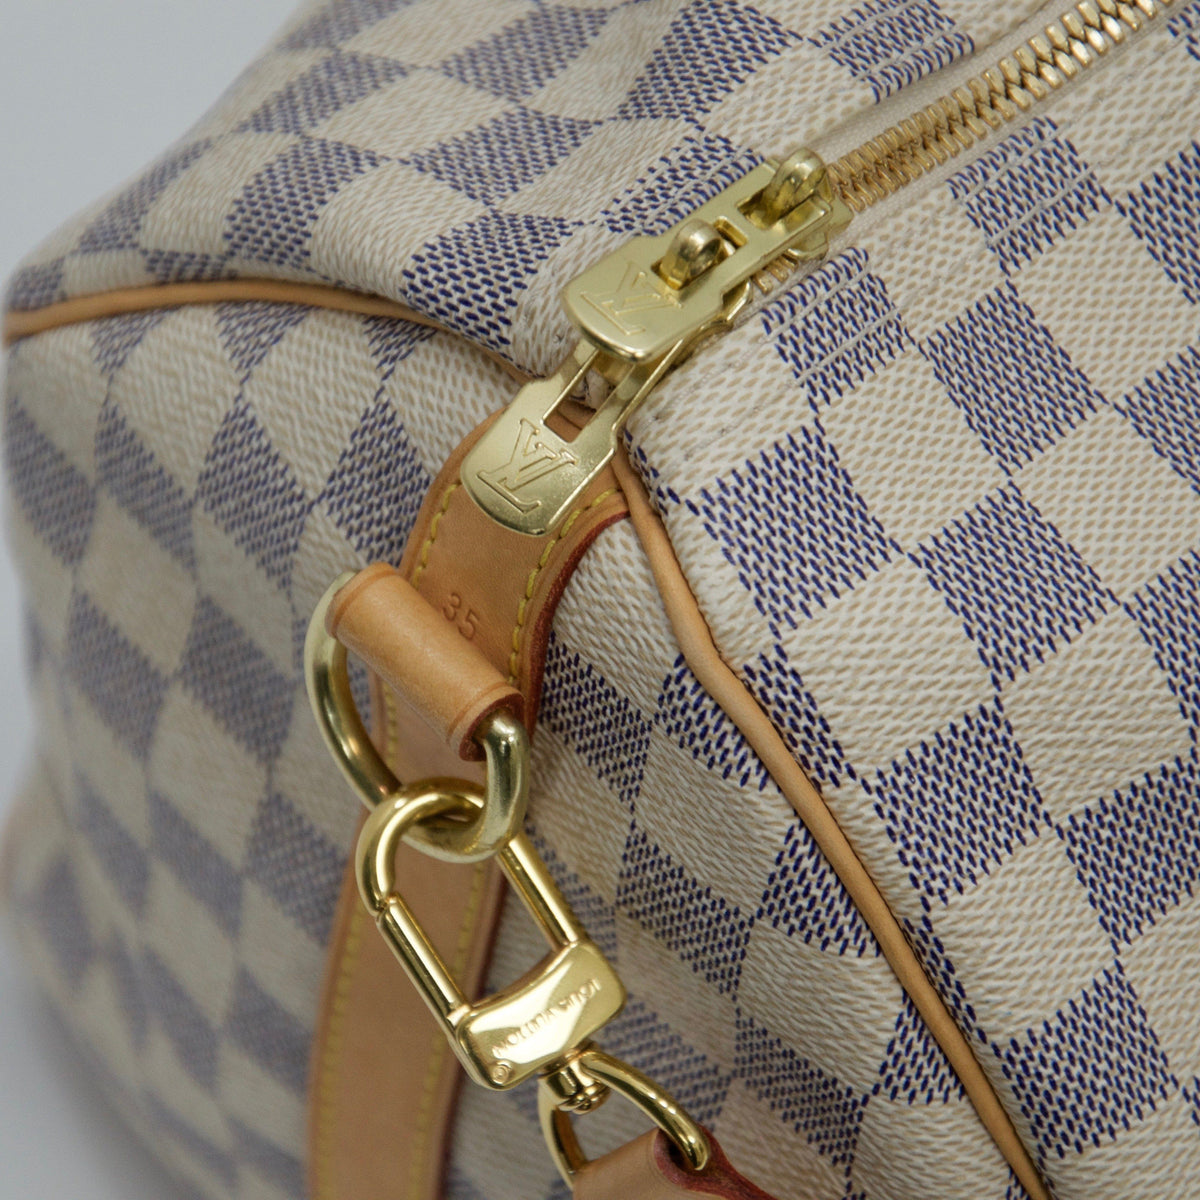 Louis Vuitton Damier Azur Speedy Bandouliere 35 Louis Vuitton Browse our  collection of products that will help you become the very best version of  yourself